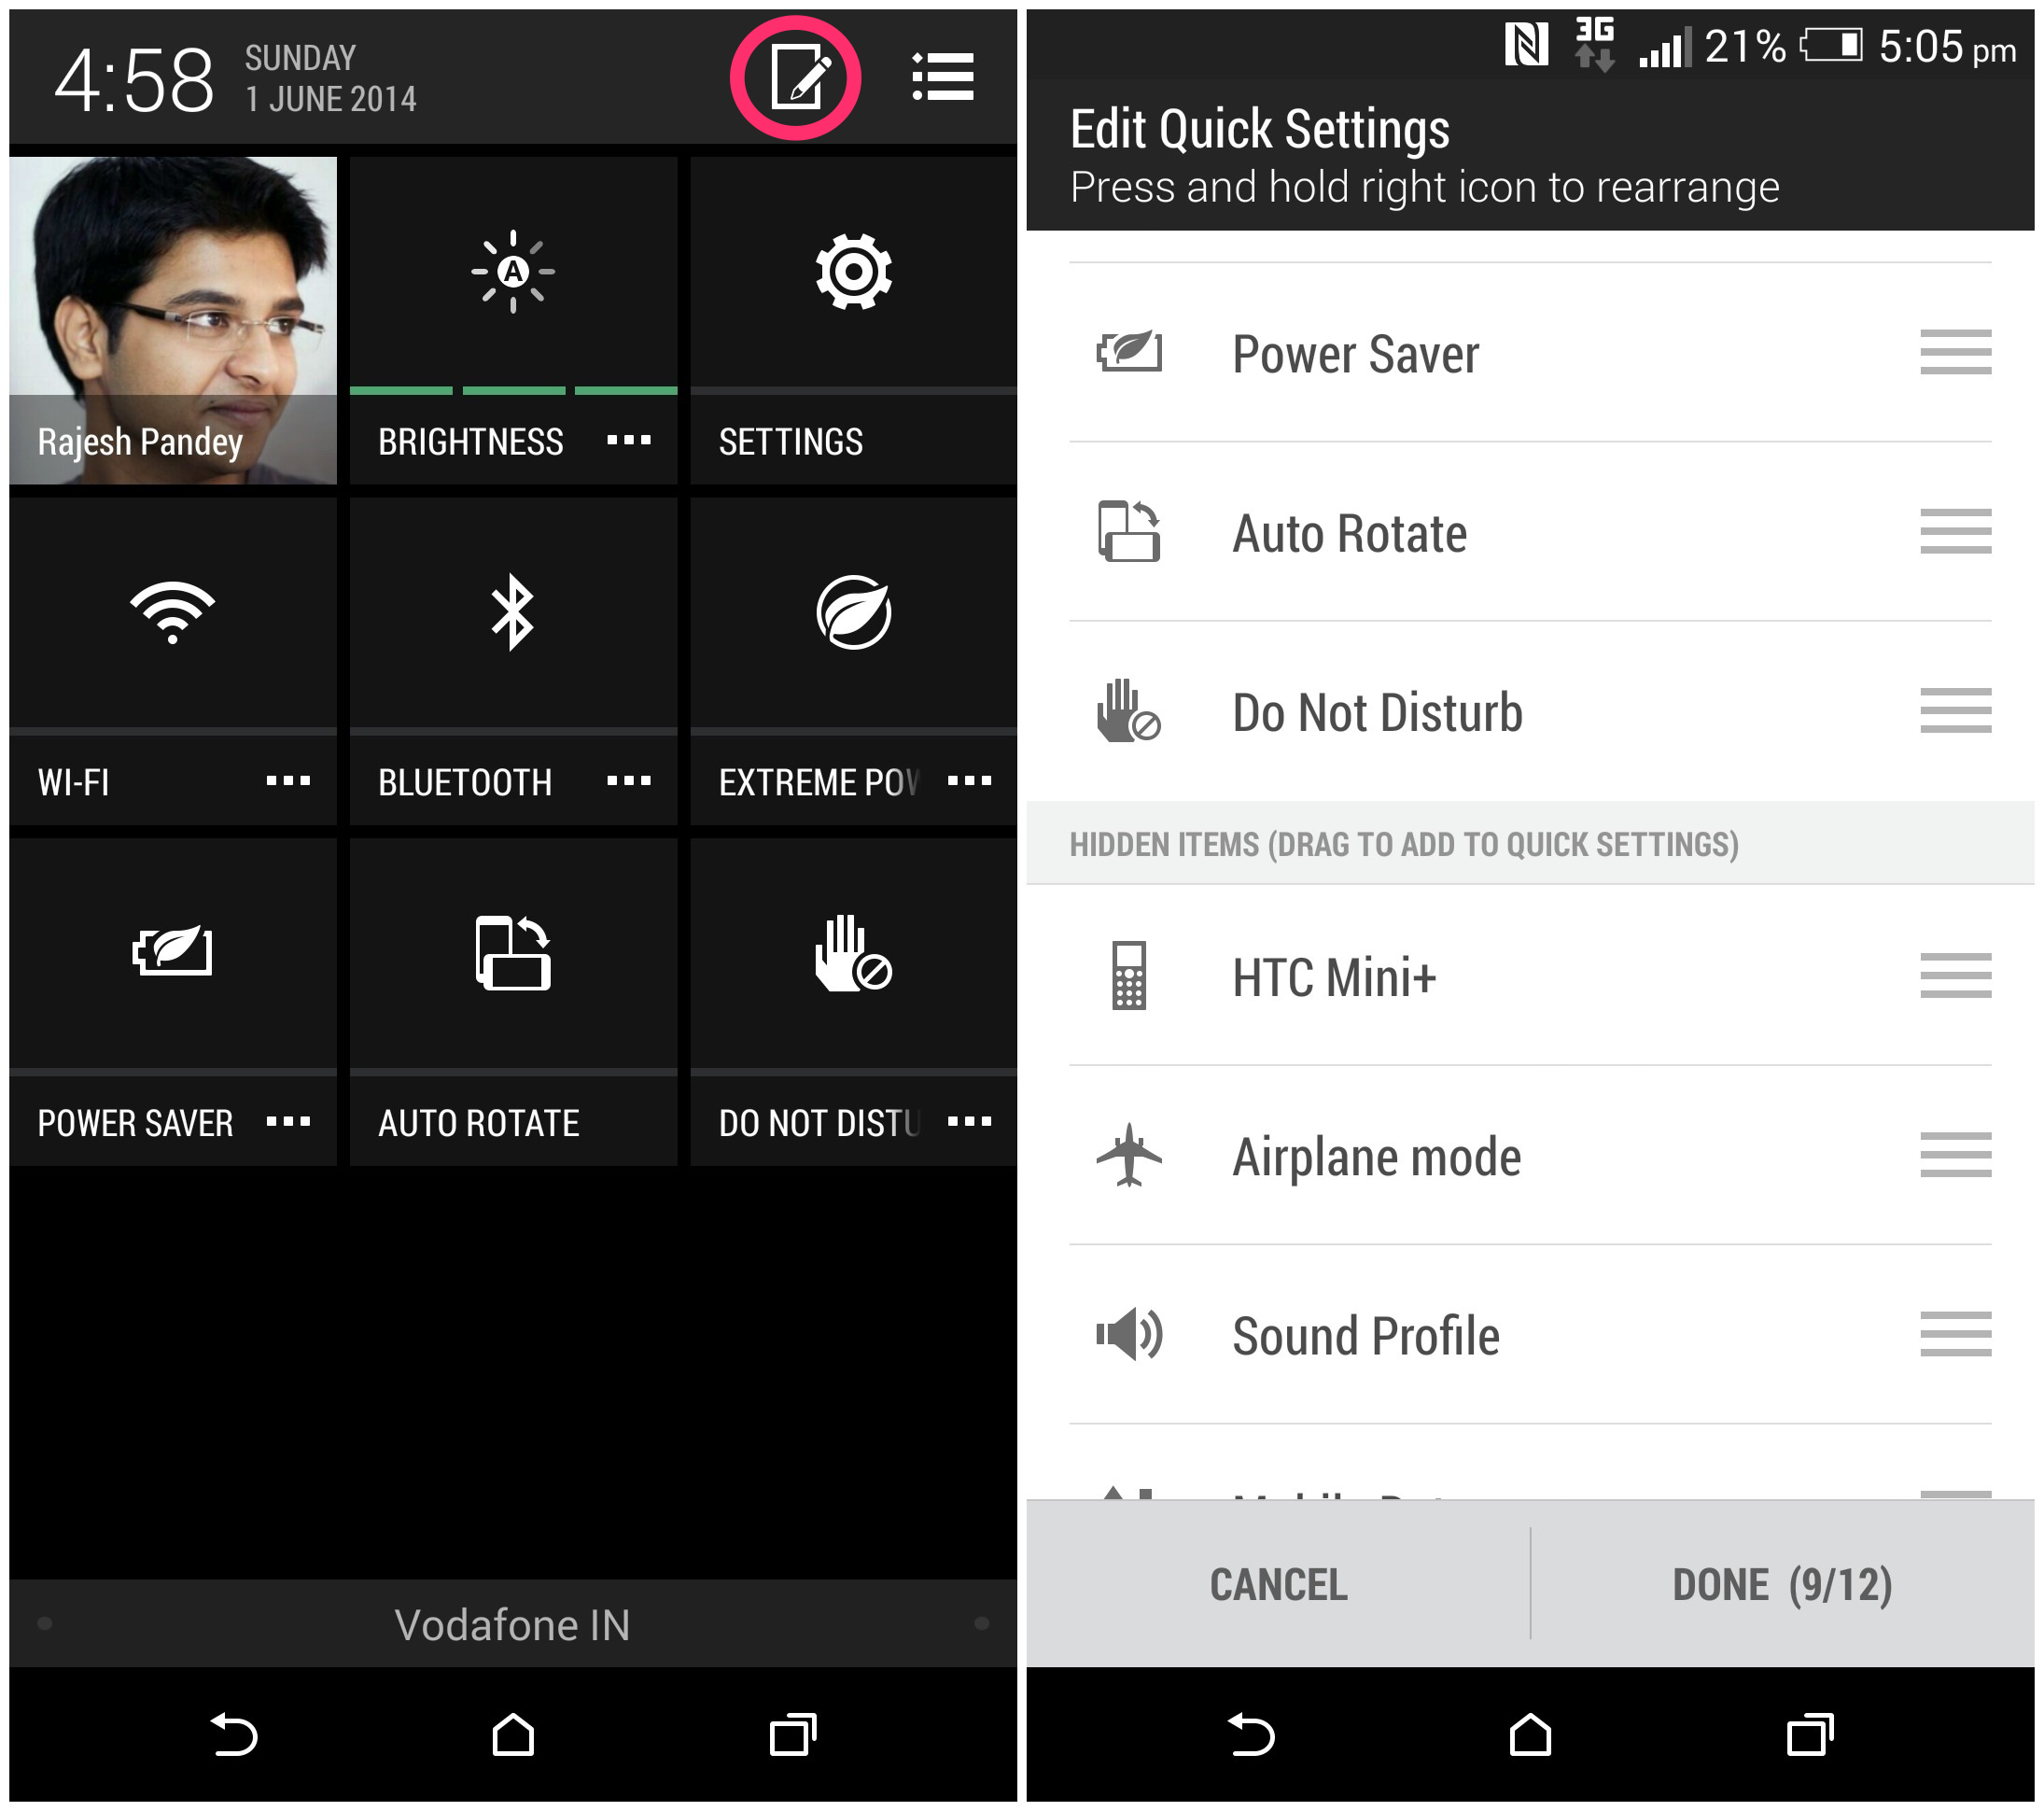 Edit Quick Settings on HTC One M8